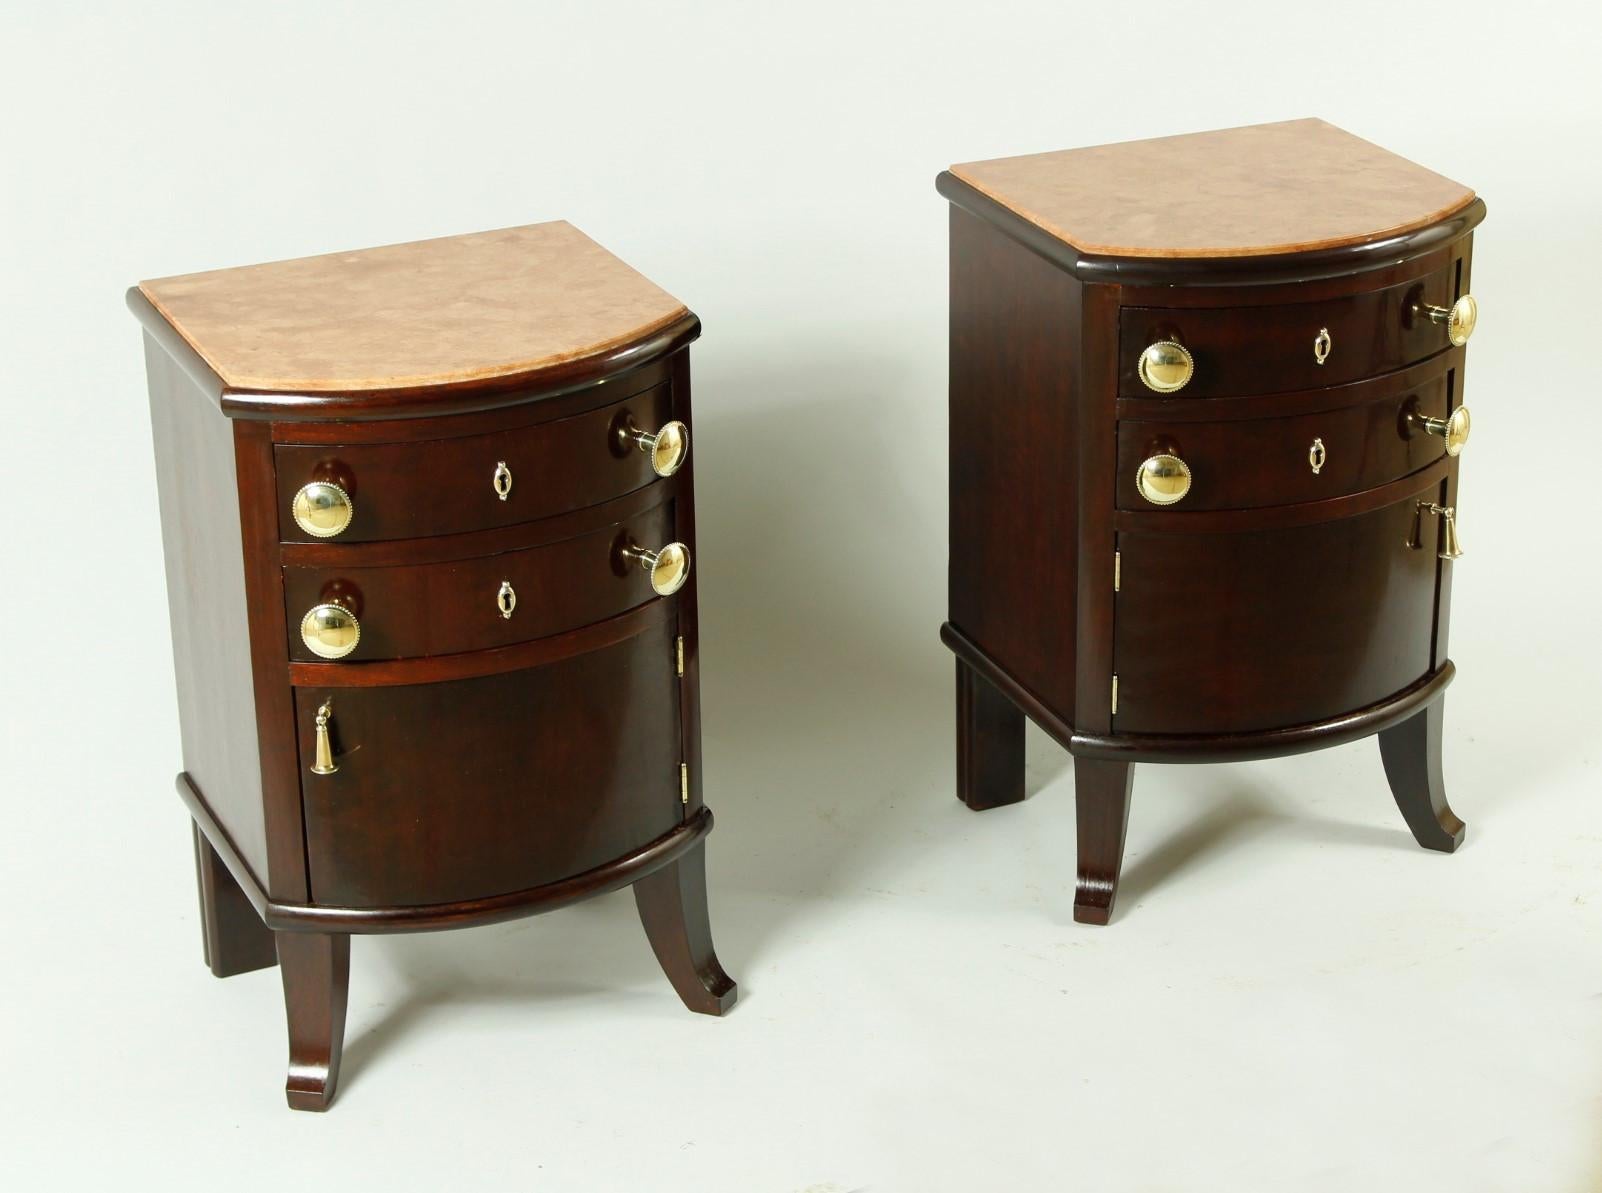 Pair of czech night stands from the early 20th century. They are made from walnut and mahogany with marble top. This night stands have been completely restored.